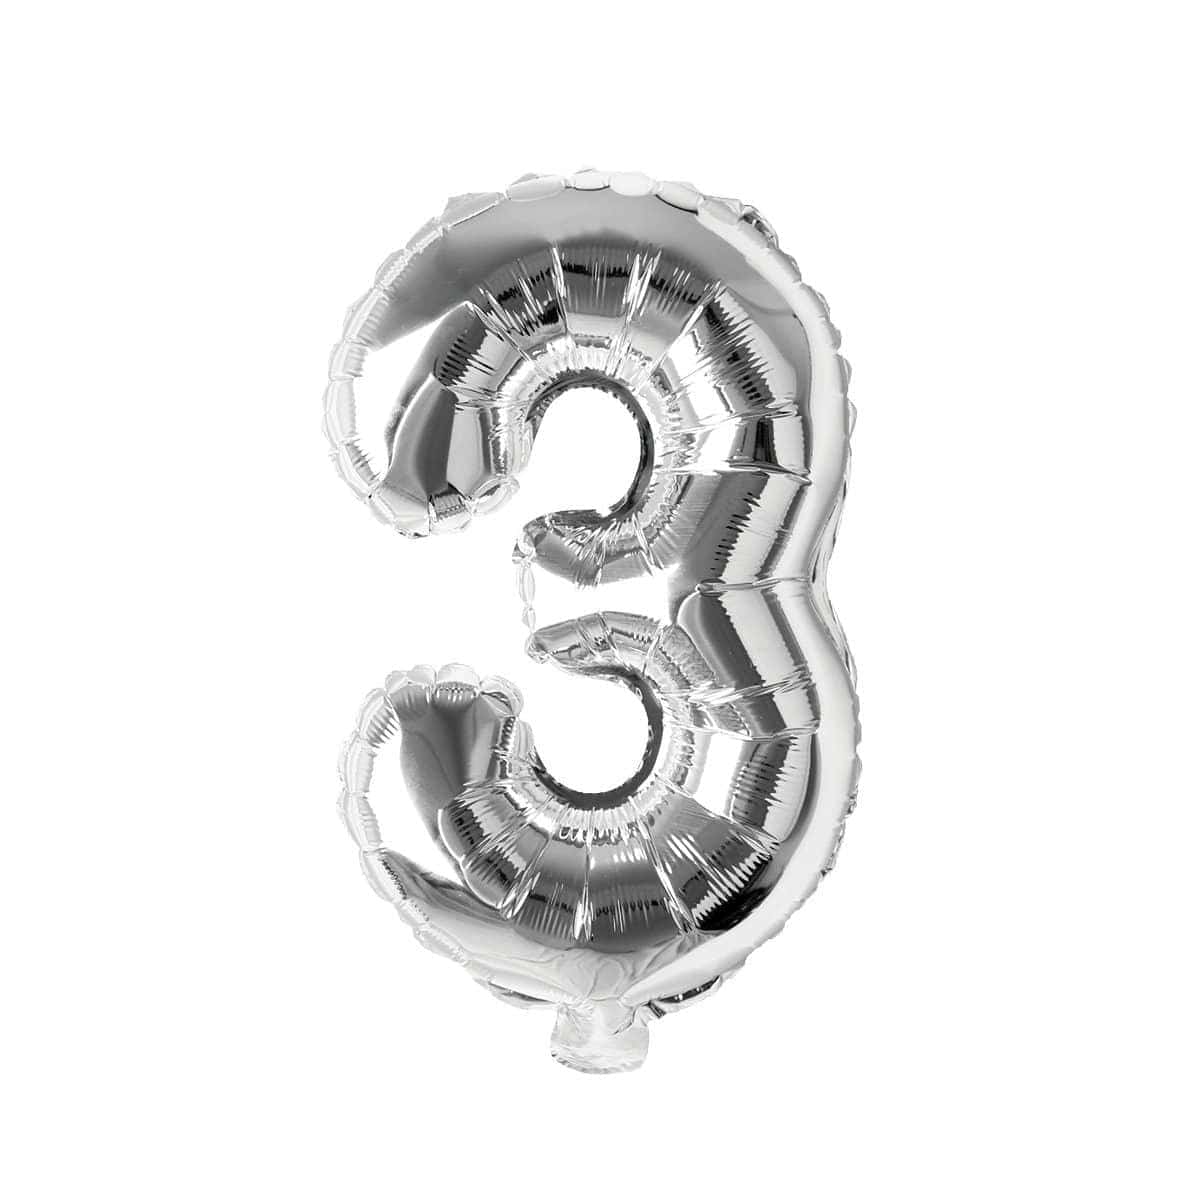 Buy Balloons Silver Number 3 Foil Balloon, 16 Inches sold at Party Expert